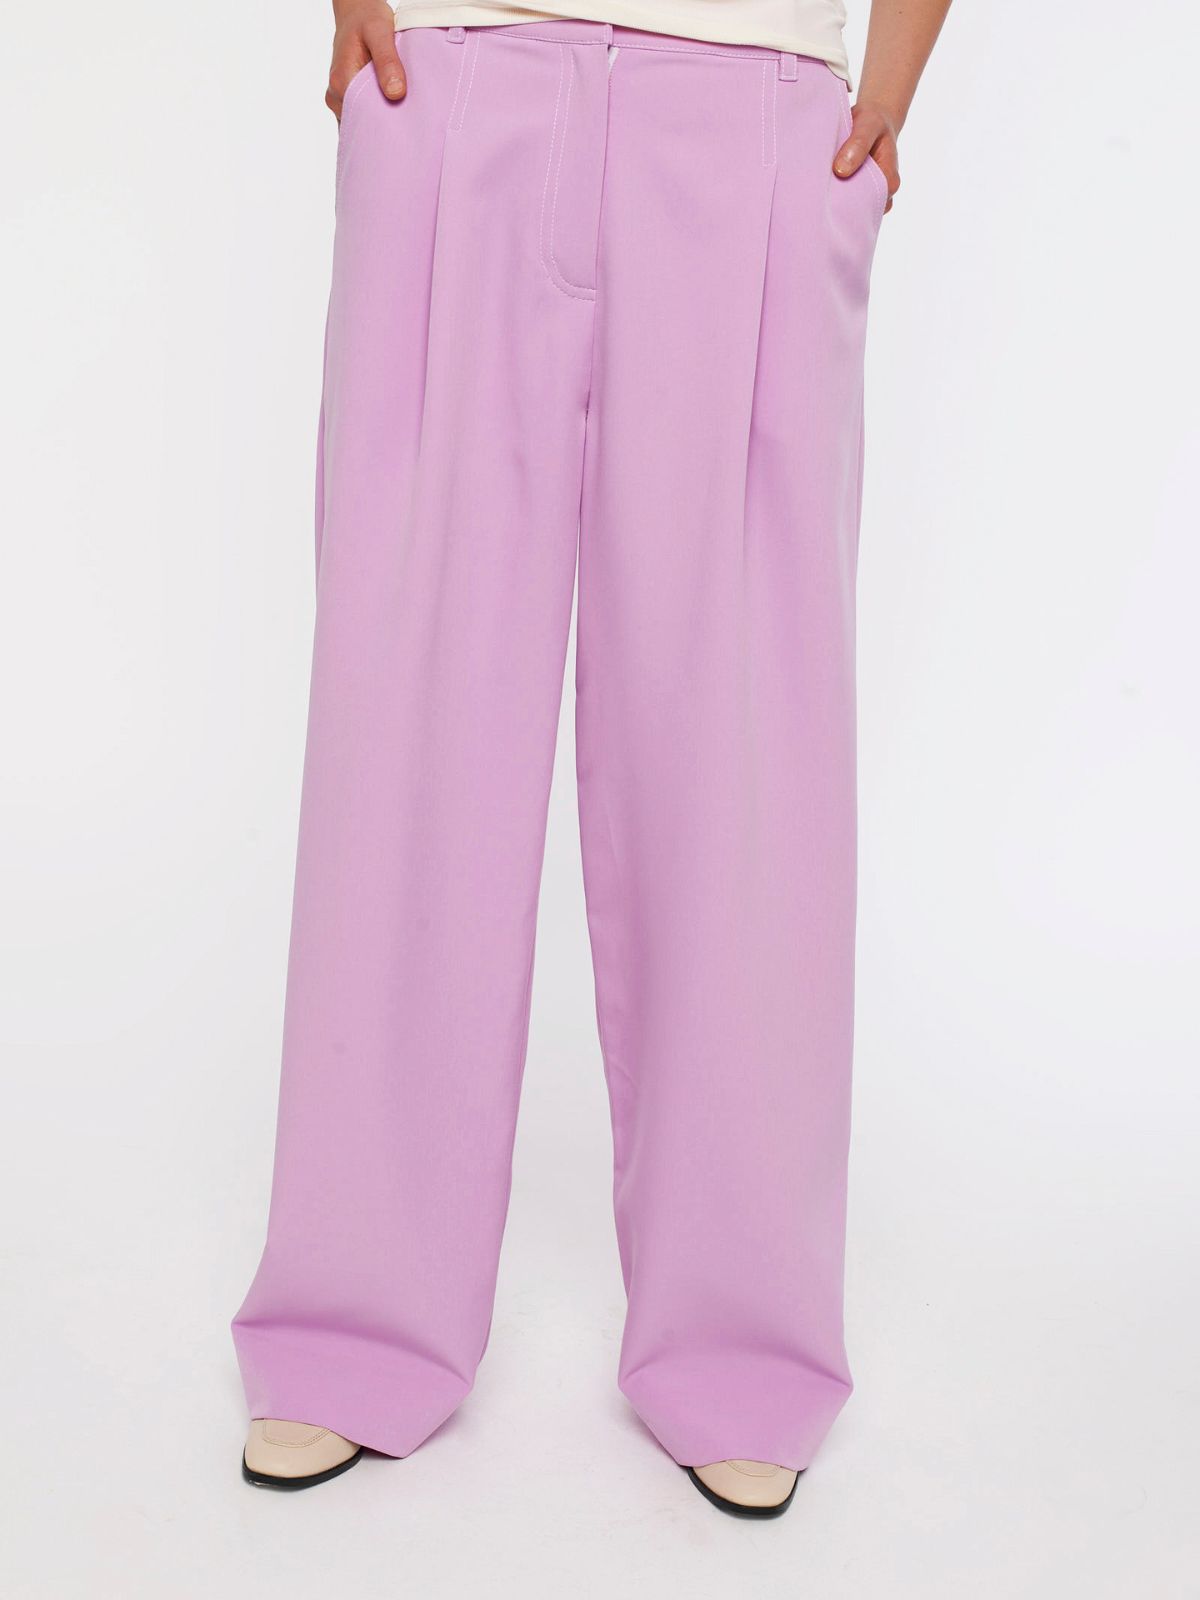 SINCLAIR trousers - orchid